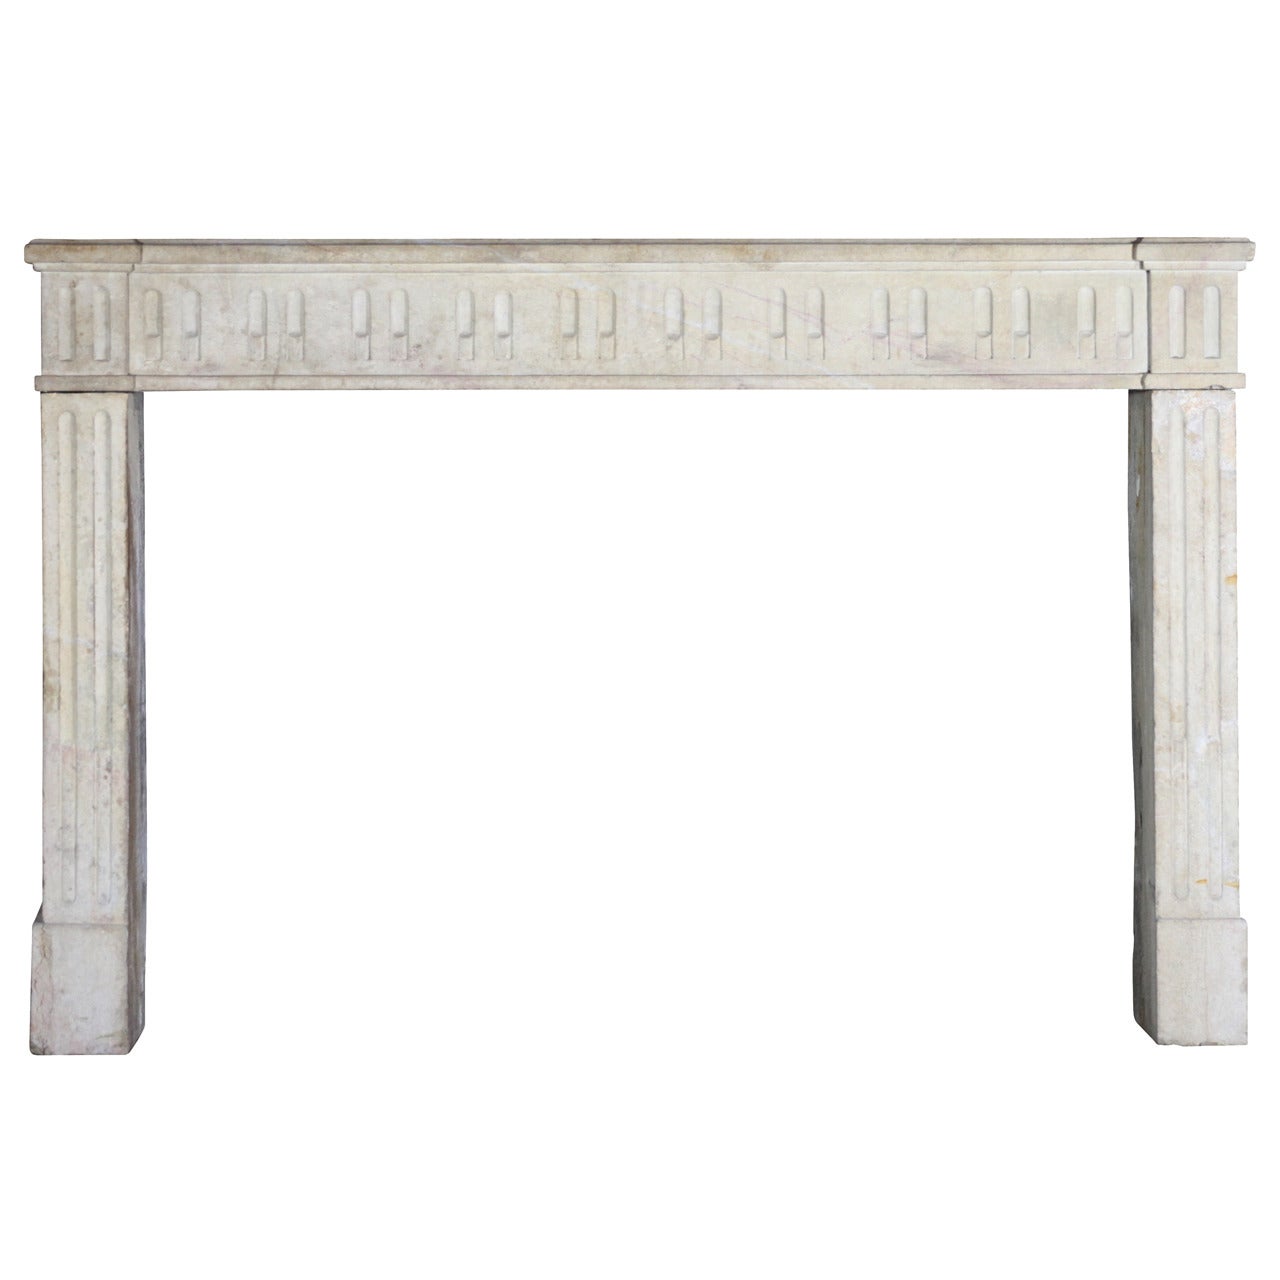 French Classic Antique Fireplace Surround in Limestone in Belgian Warehouse